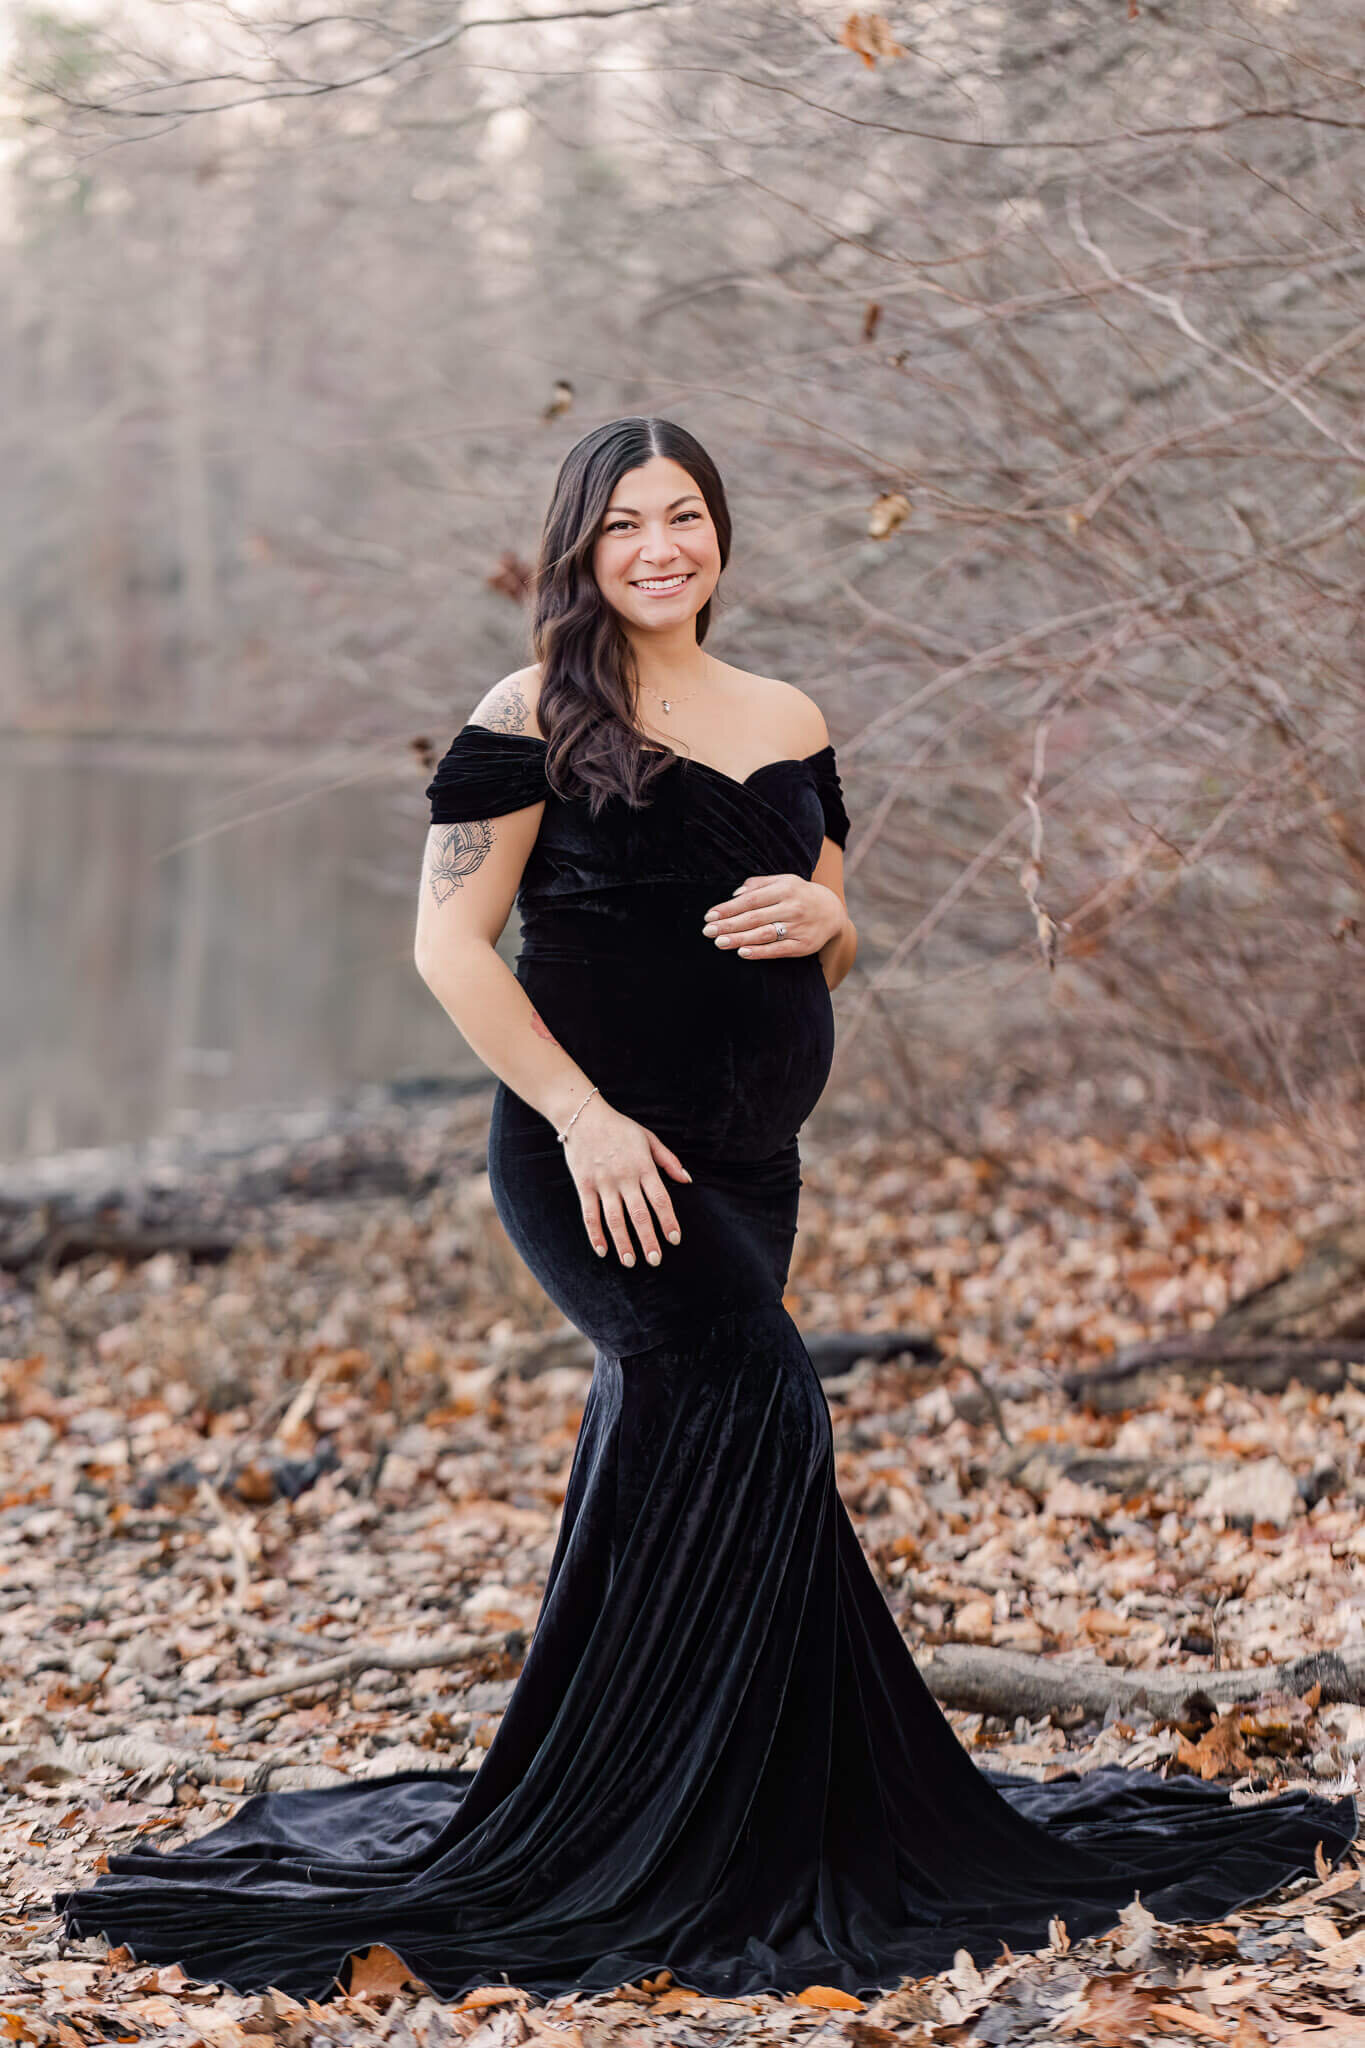 A beautiful mother-to-be in a black dress posing for her Burke, Virginia maternity portraits.